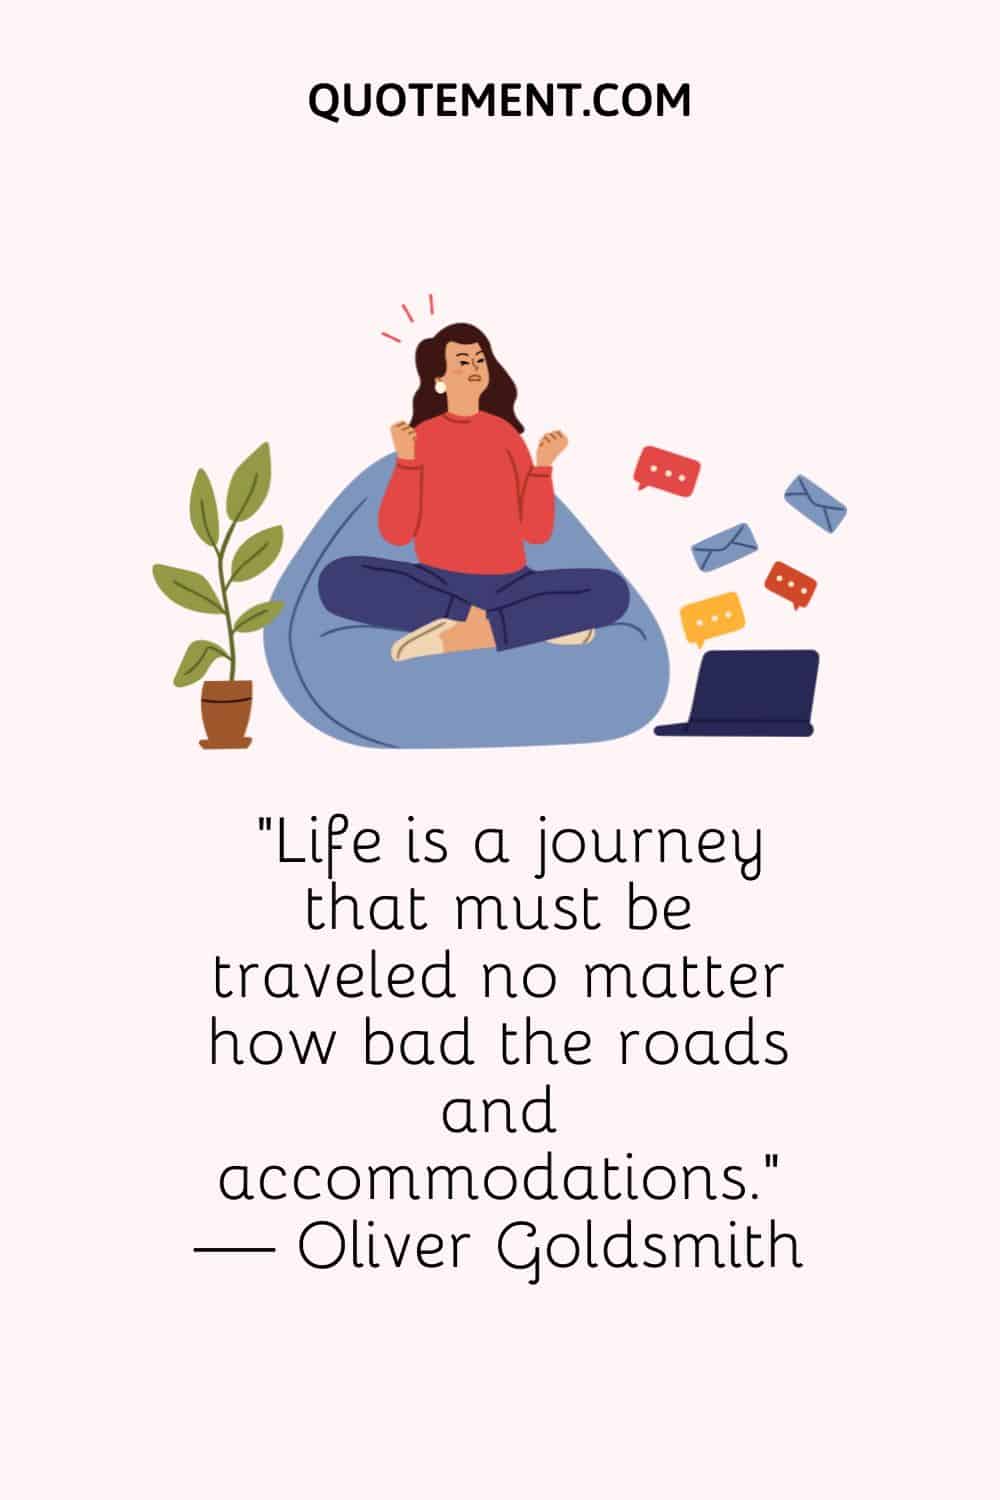 image of a frustrated woman representing trust the journey quote
